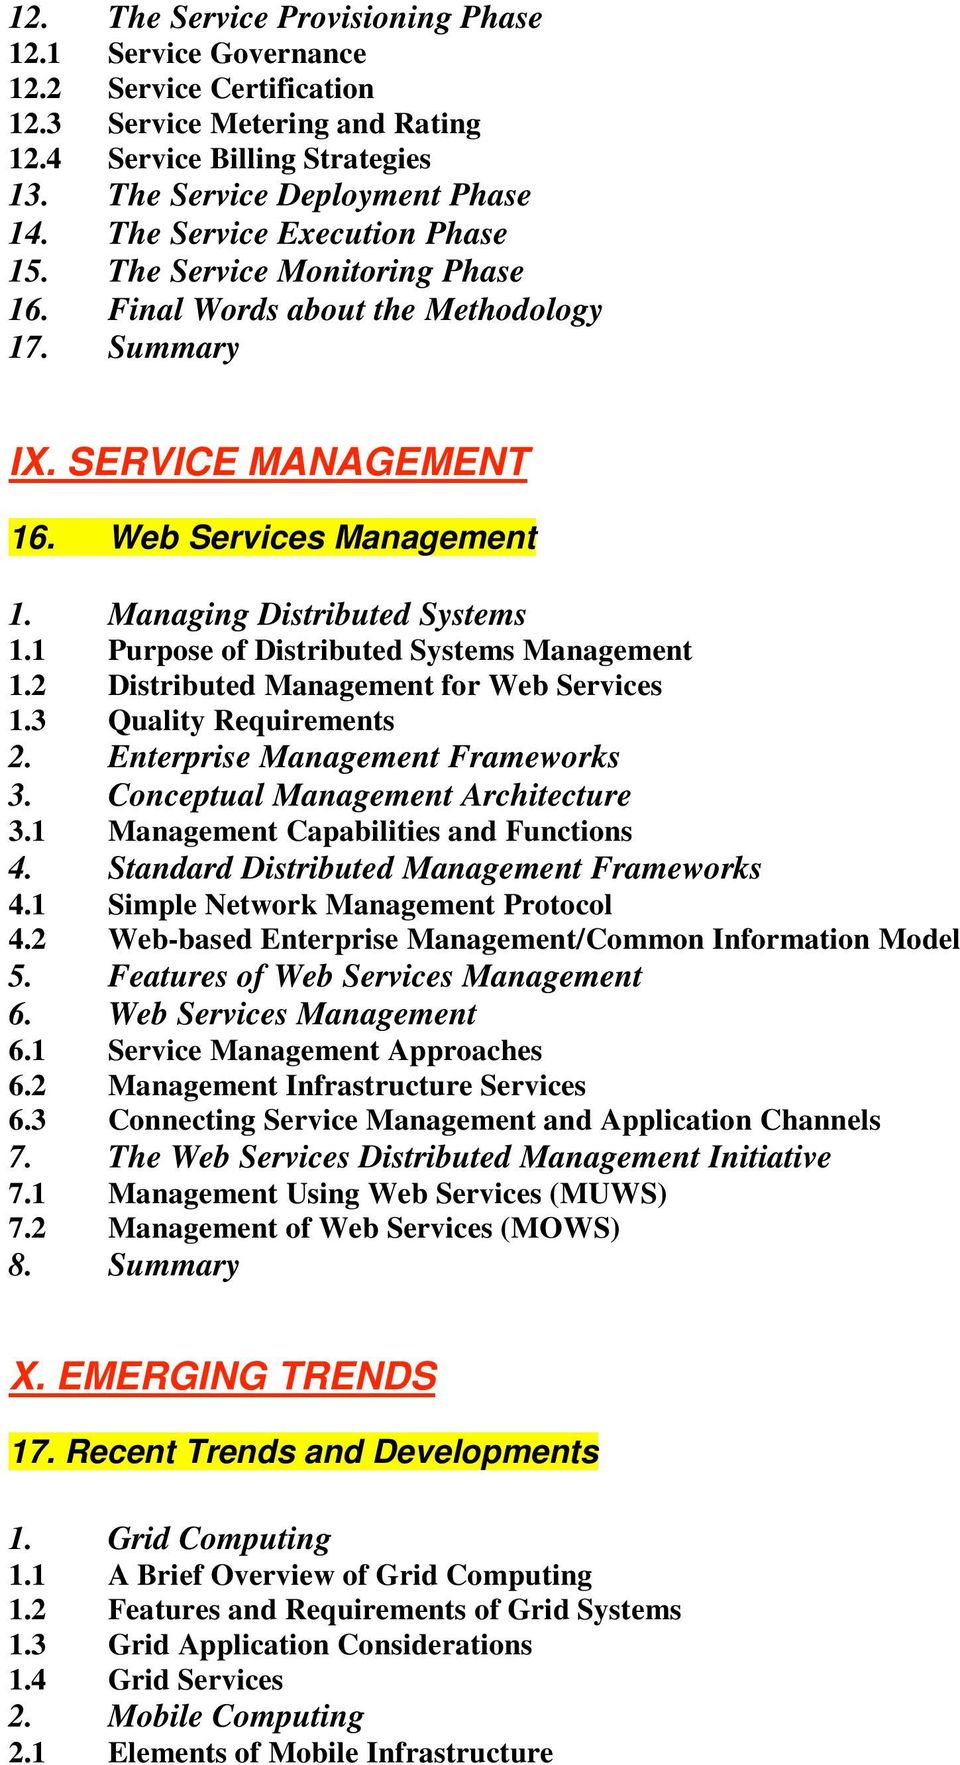 1 Purpose of Distributed Systems Management 1.2 Distributed Management for Web Services 1.3 Quality Requirements 2. Enterprise Management Frameworks 3. Conceptual Management Architecture 3.